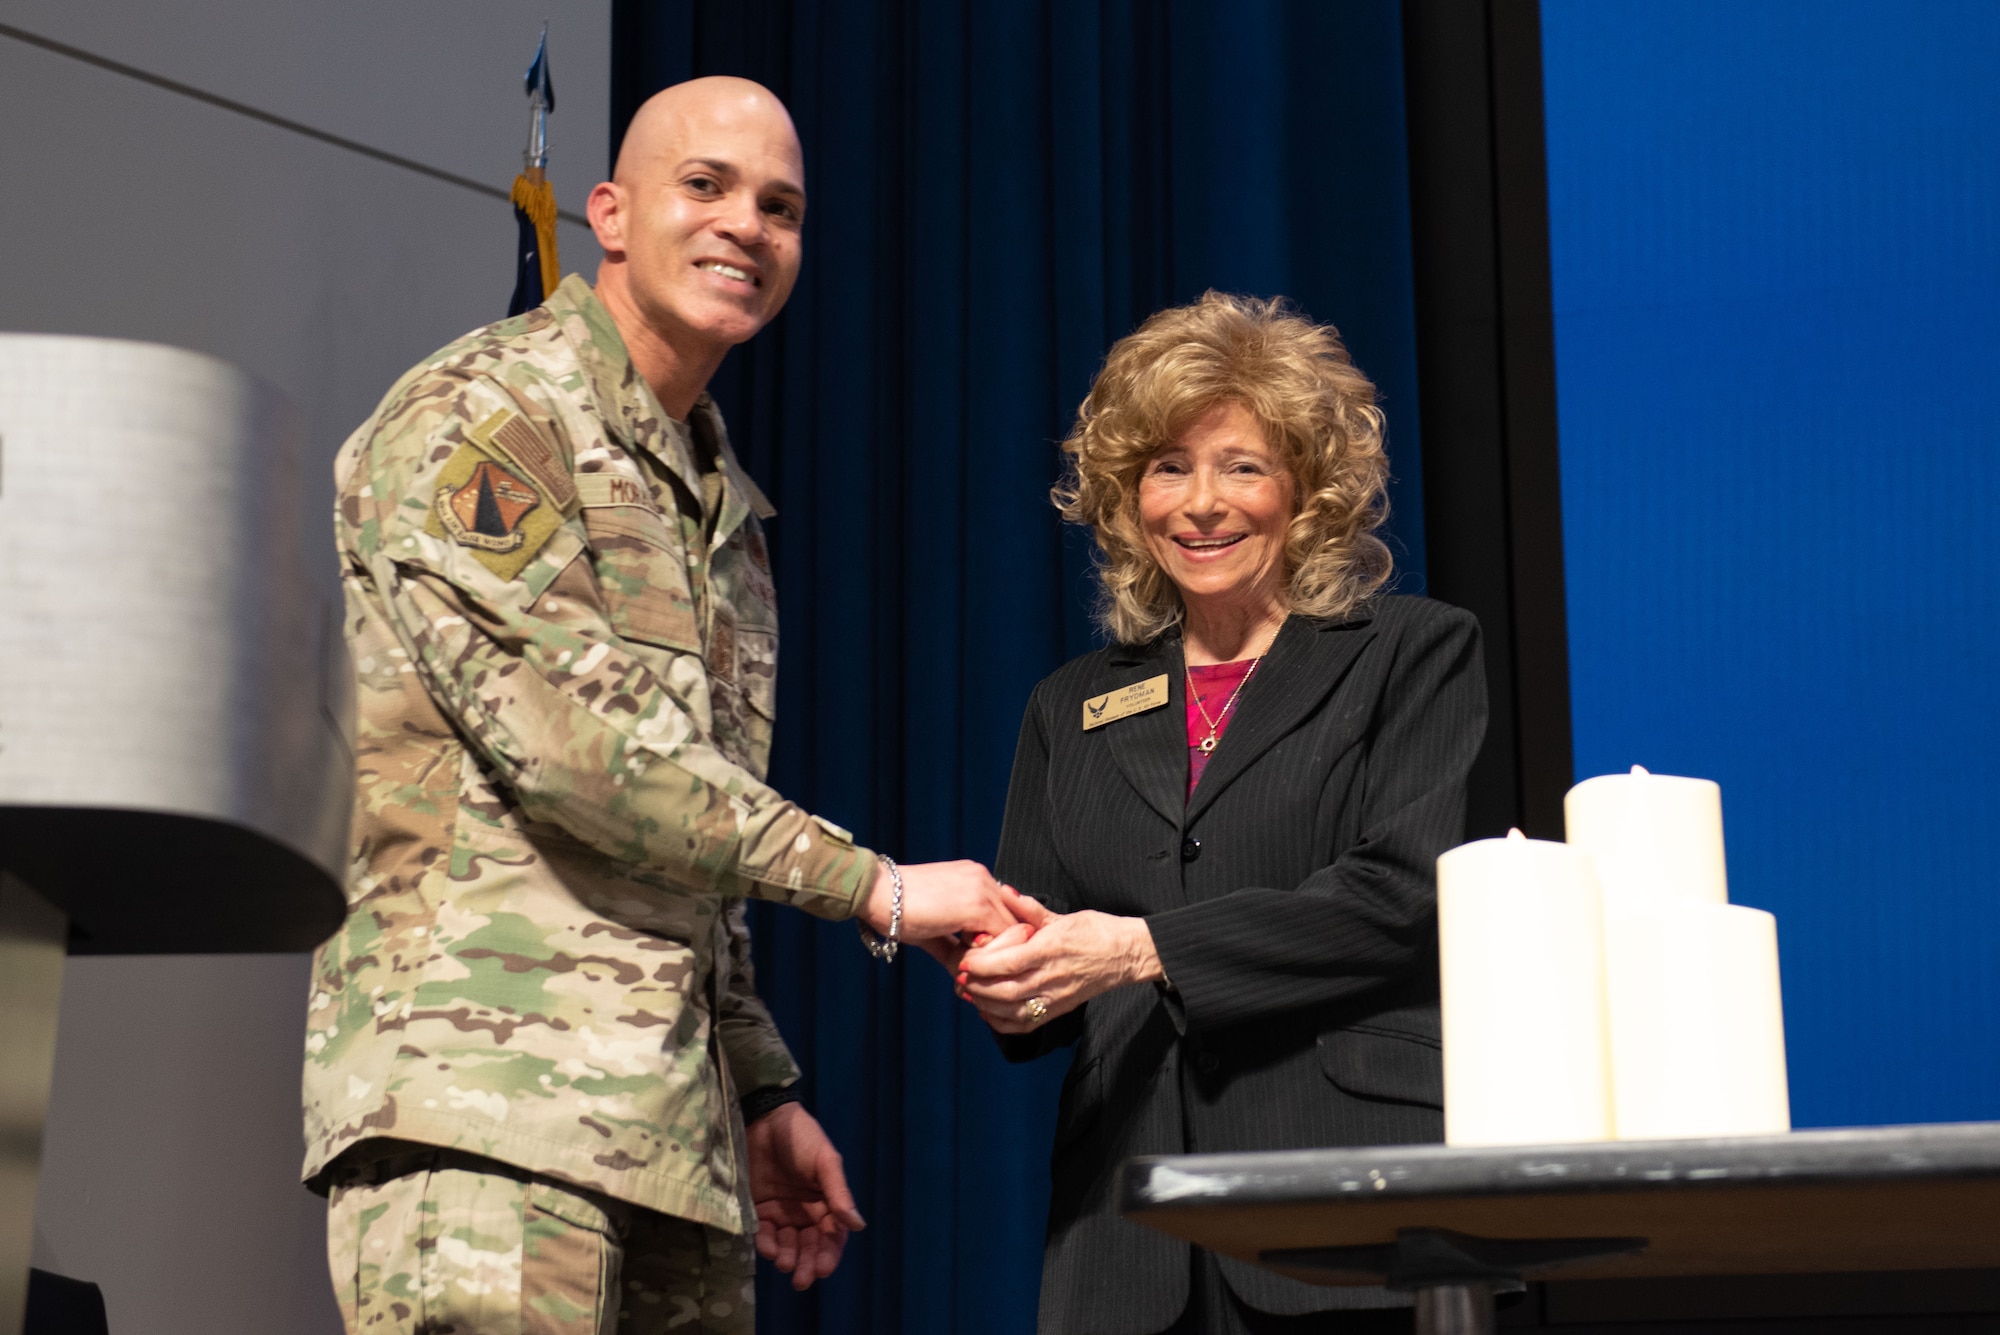 Chief Master Sgt. Lloyd Morales, left, 88th Air Base Wing command chief, awards Dr. Renate Frydman, Holocaust survivor and curator and docent for the Holocaust exhibit at the National Museum of the United States Air Force as well as the director of the Dayton Holocaust Resource Center, with an 88th Air Base Wing coin at Wright-Patterson Air Force Base, Ohio. Wright-Patterson observes Holocaust Remembrance Day every year to honor those six million Jews who were persecuted and murdered by the Nazi Germans during the Holocaust. (U.S. Air Force photo by Darrius Parker)